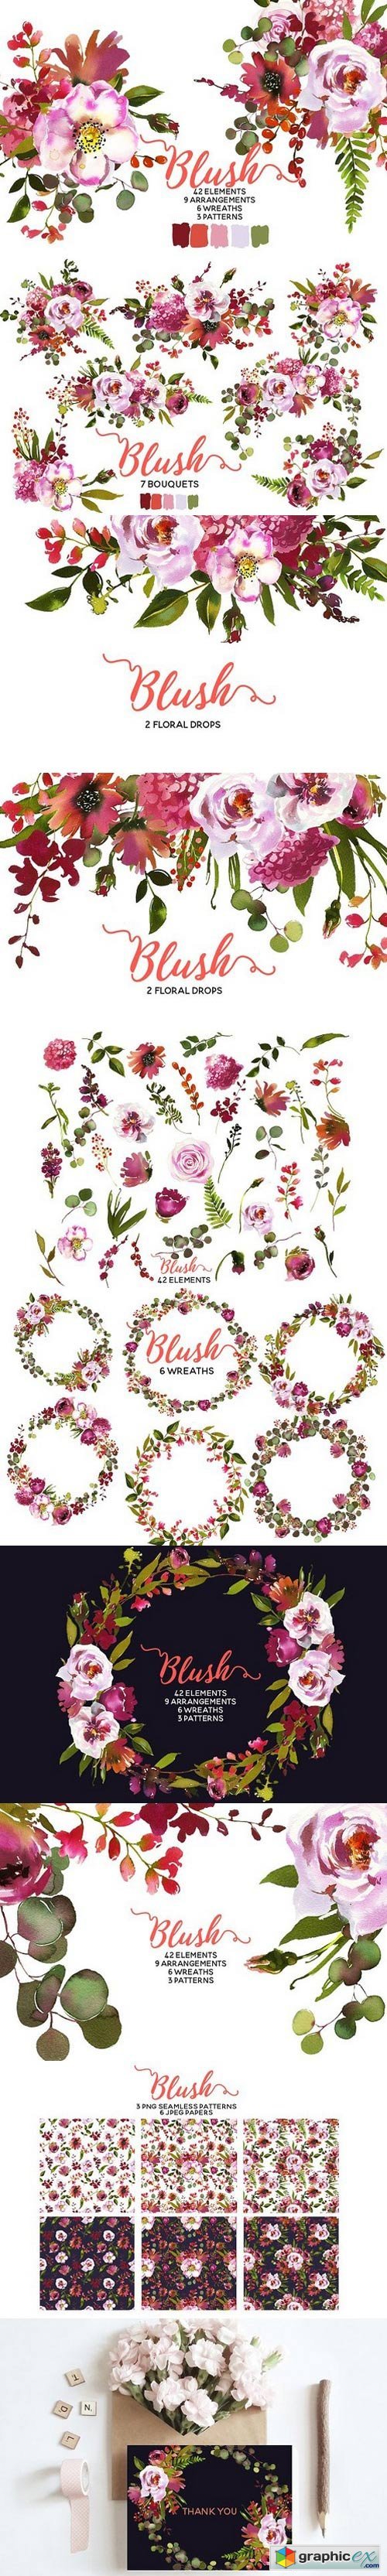 Blush Pink Coral Watercolor Flowers